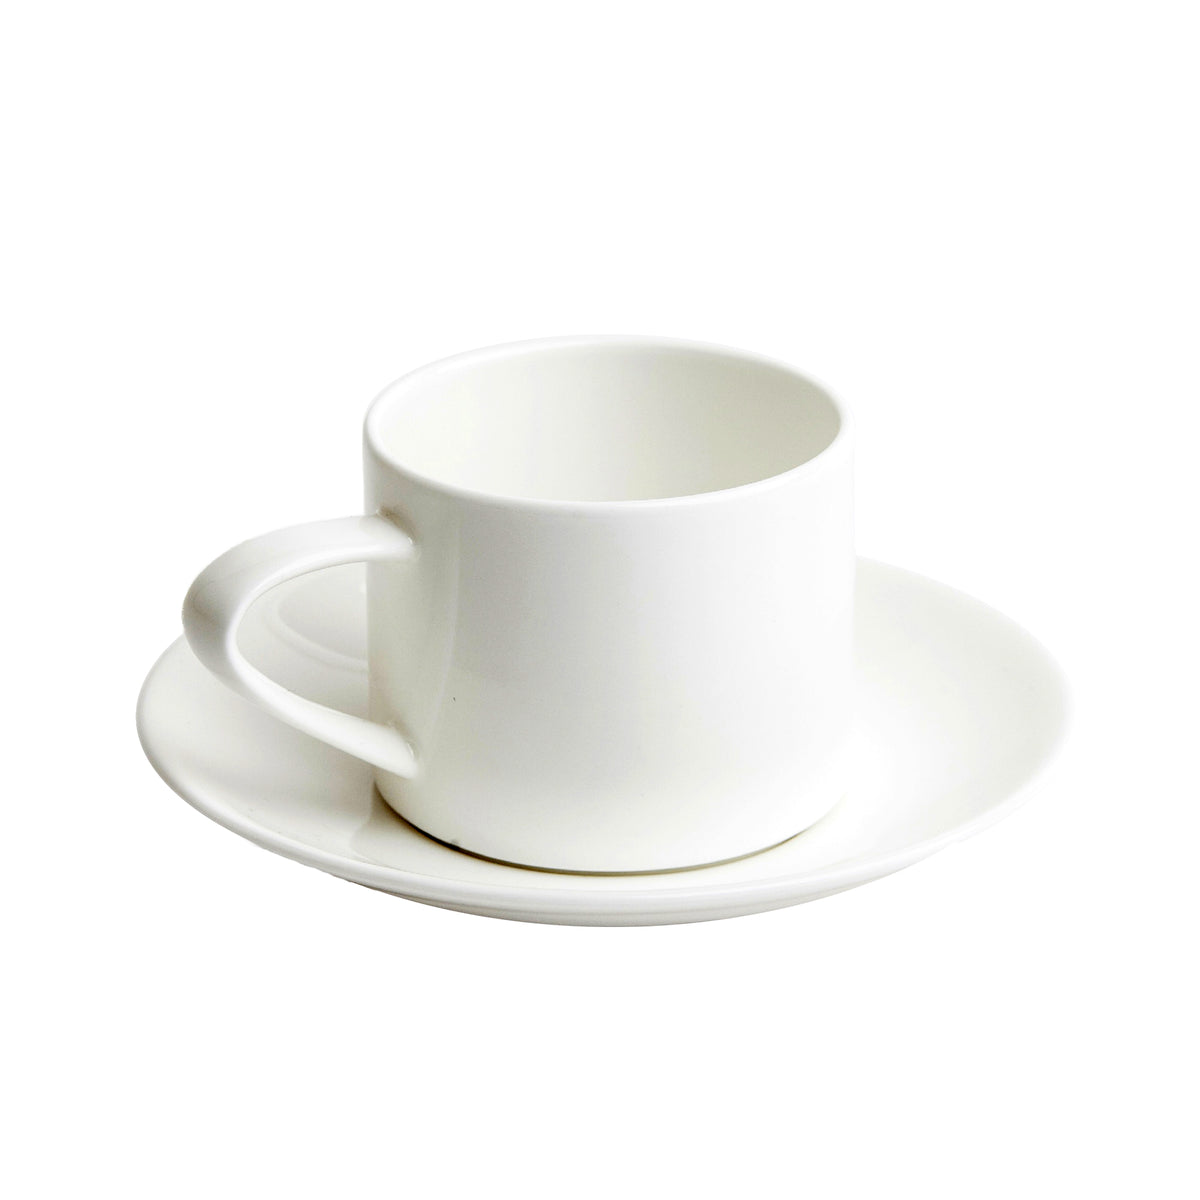 A Table Stackable Espresso Cup and Saucer